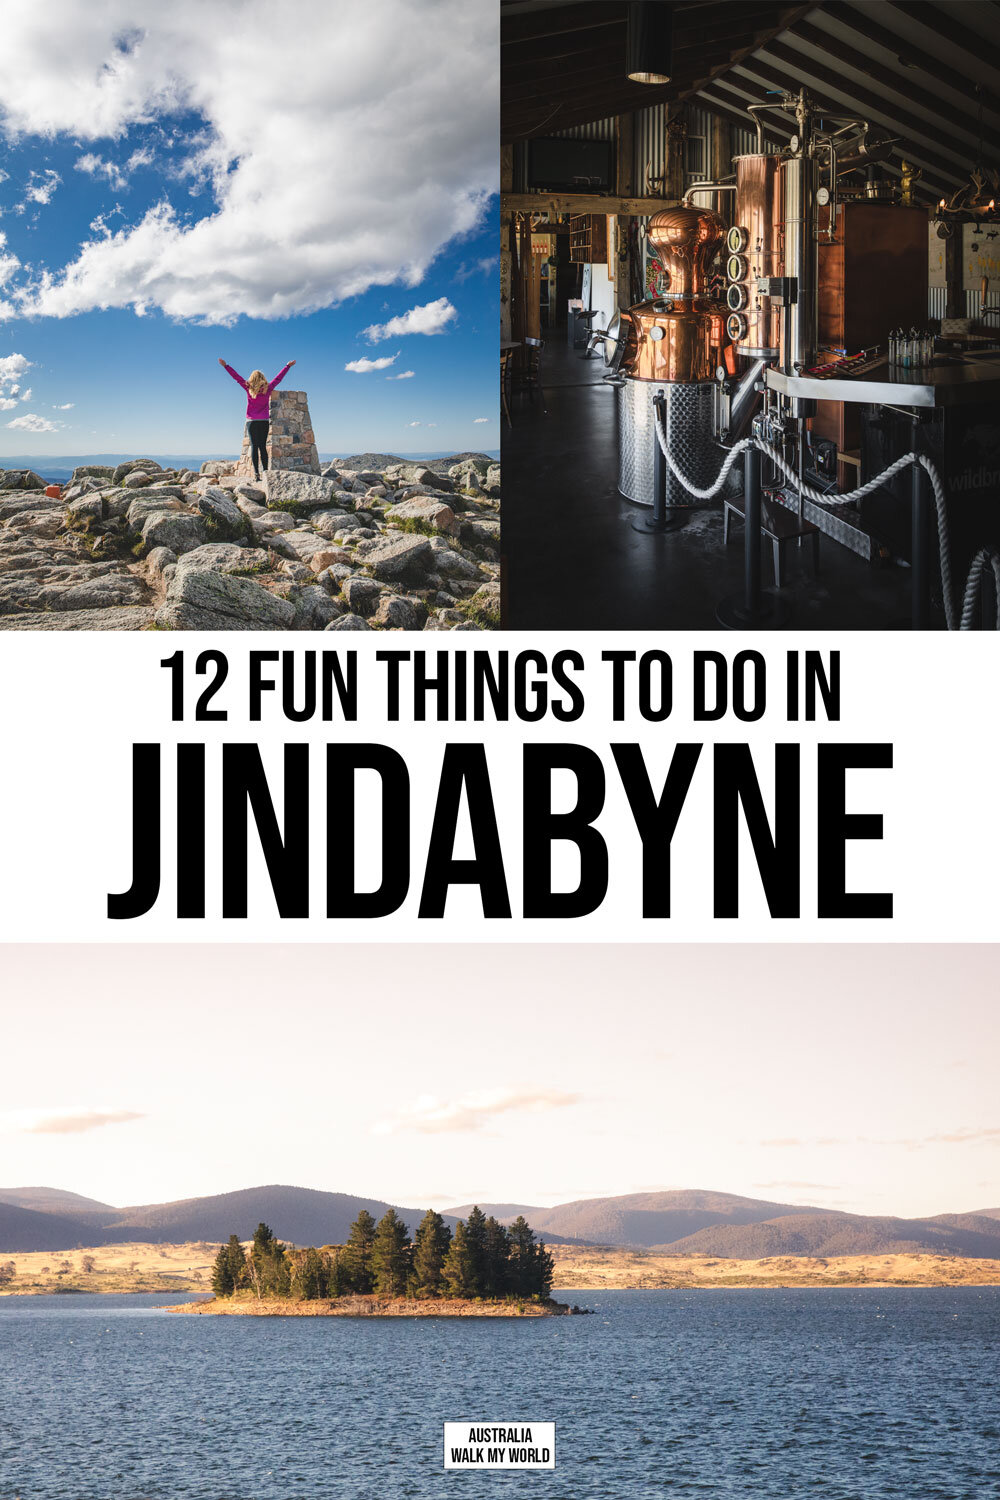 12 of the best things to do in Jindabyne - other than skiing! We’ll tell you about the amazing activities near this pretty town in the Snowy Mountains including hiking trails, view points, the gin distillery and brewery, as well where to see brumbie…